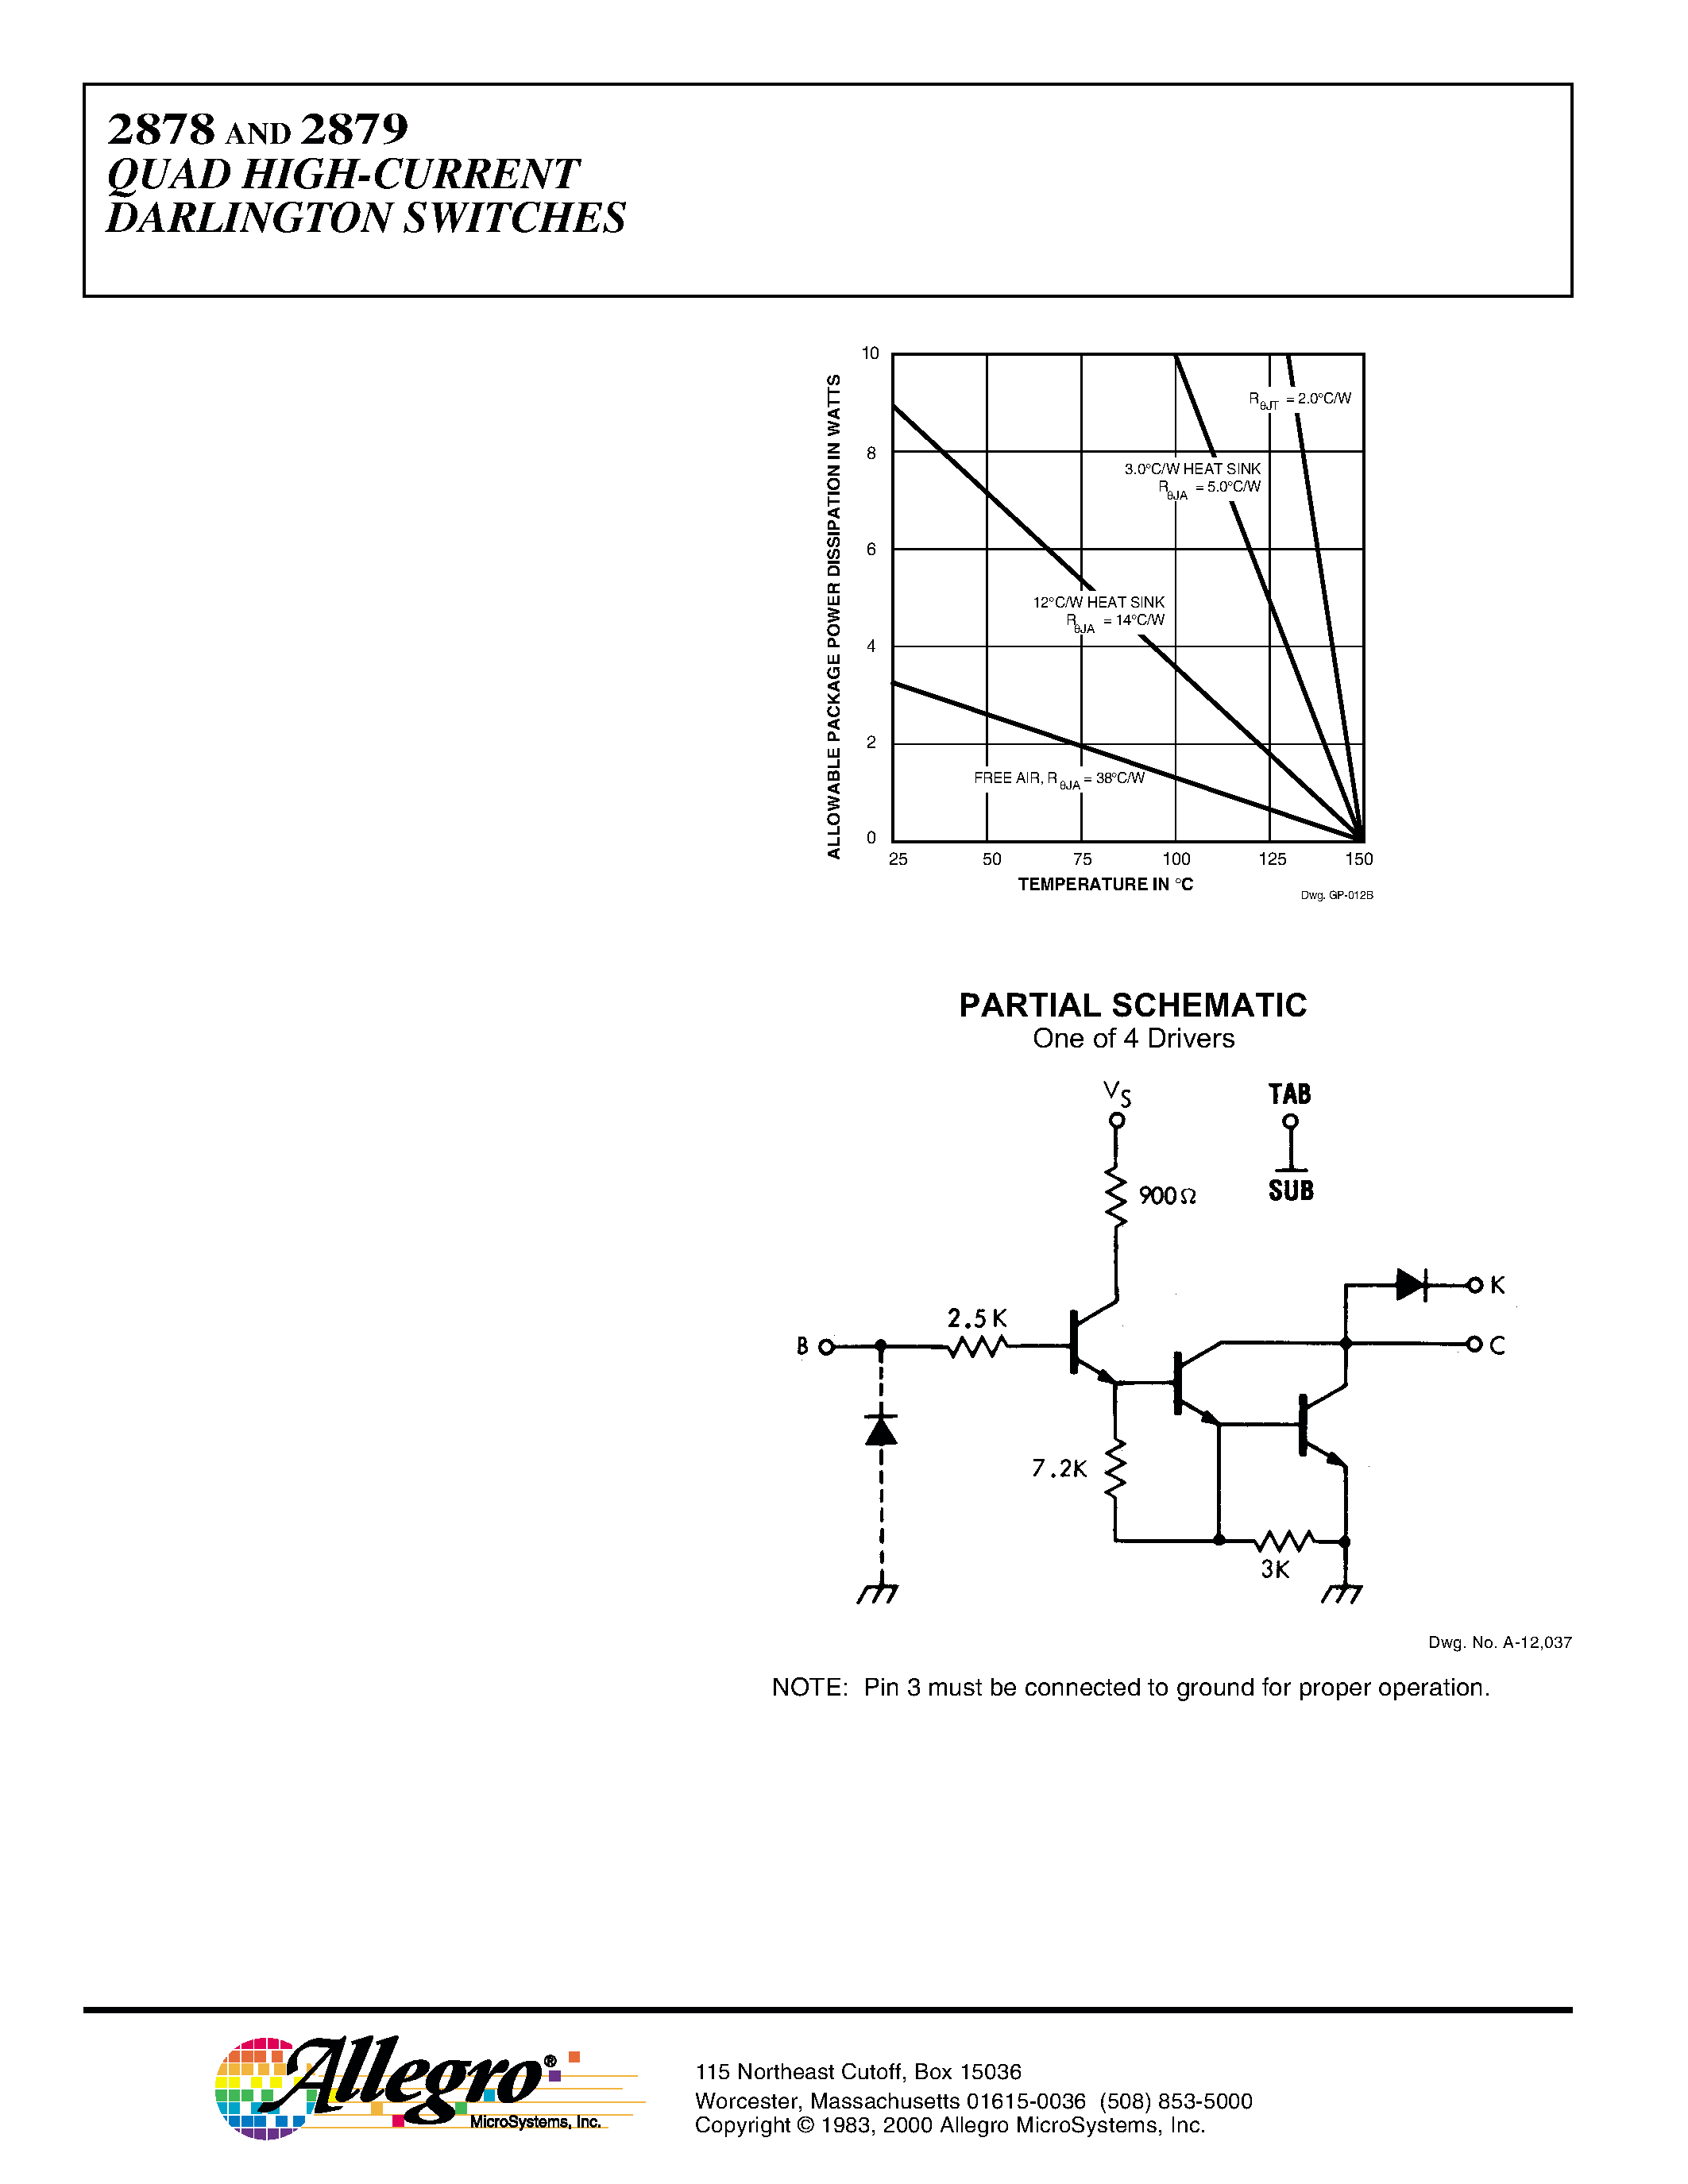 Datasheet 2878 - QUAD HIGH-CURRENT DARLINGTON SWITCHES page 2